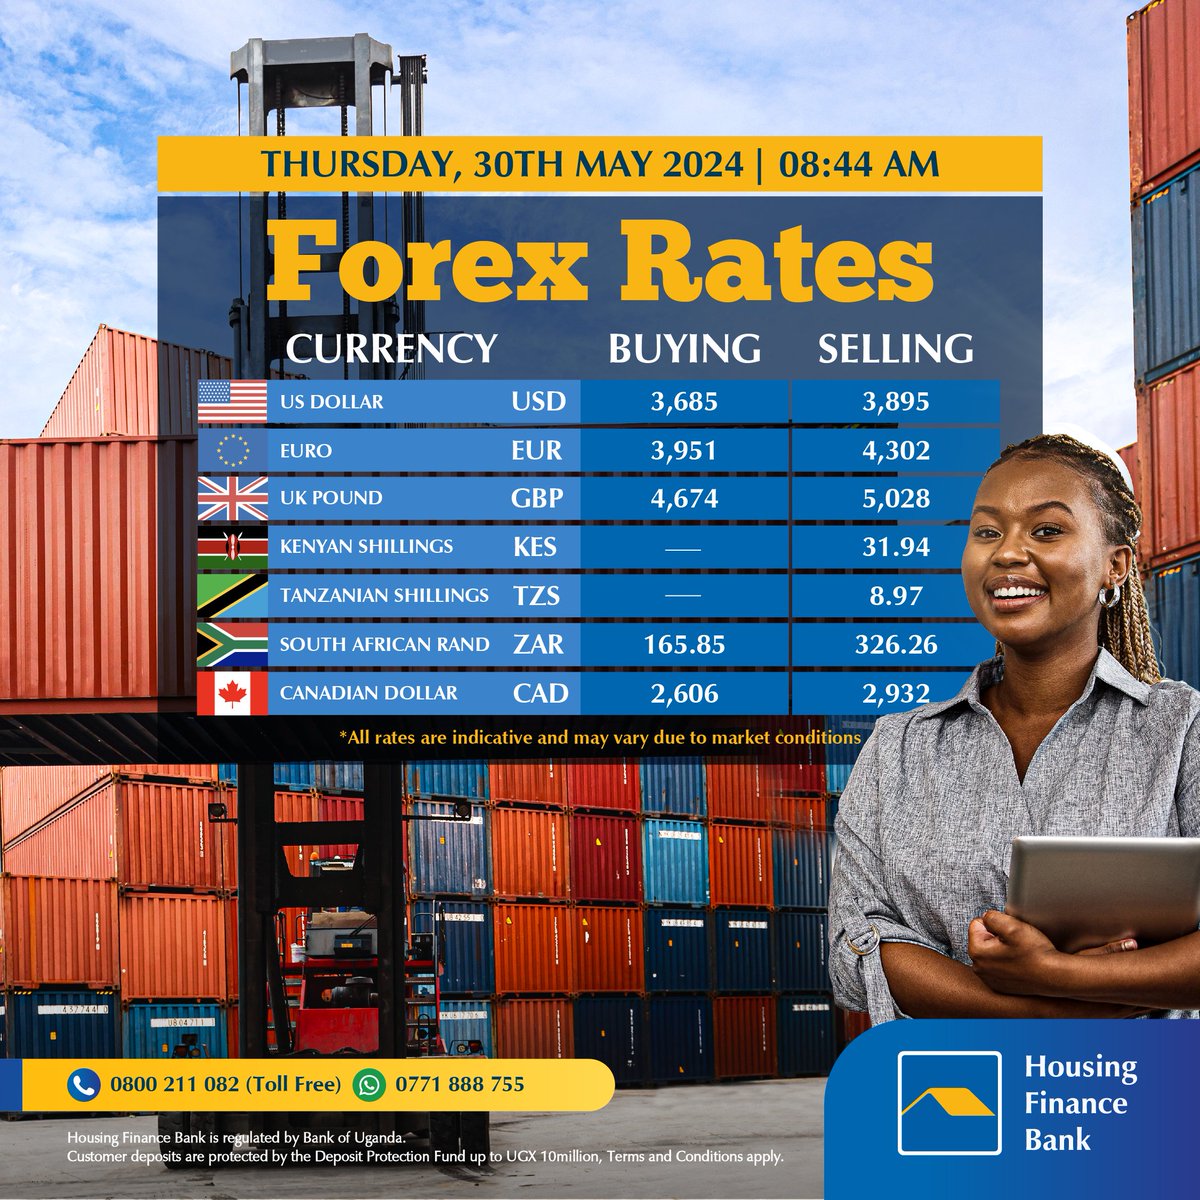 Simplify your currency exchange with #HFBForexExchangeRates. Visit any of our branches today. Forex rates may differ due to changes in market conditions. #WeMakeItEasy